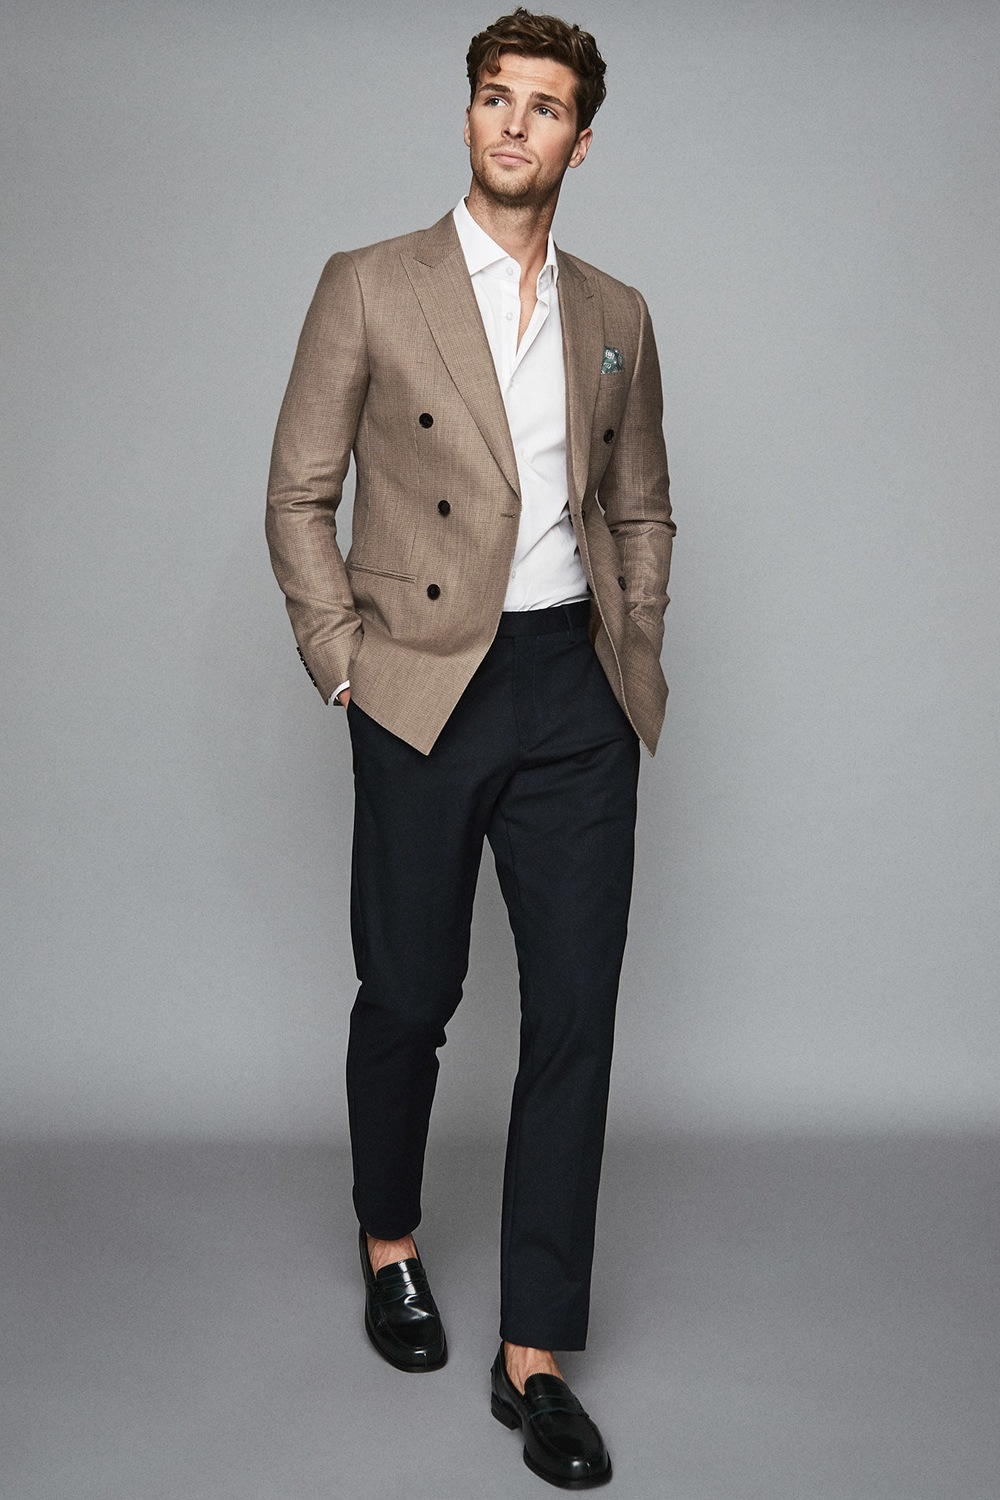 Sophisticated Style: Elevate Your Look with Men’s Blazers